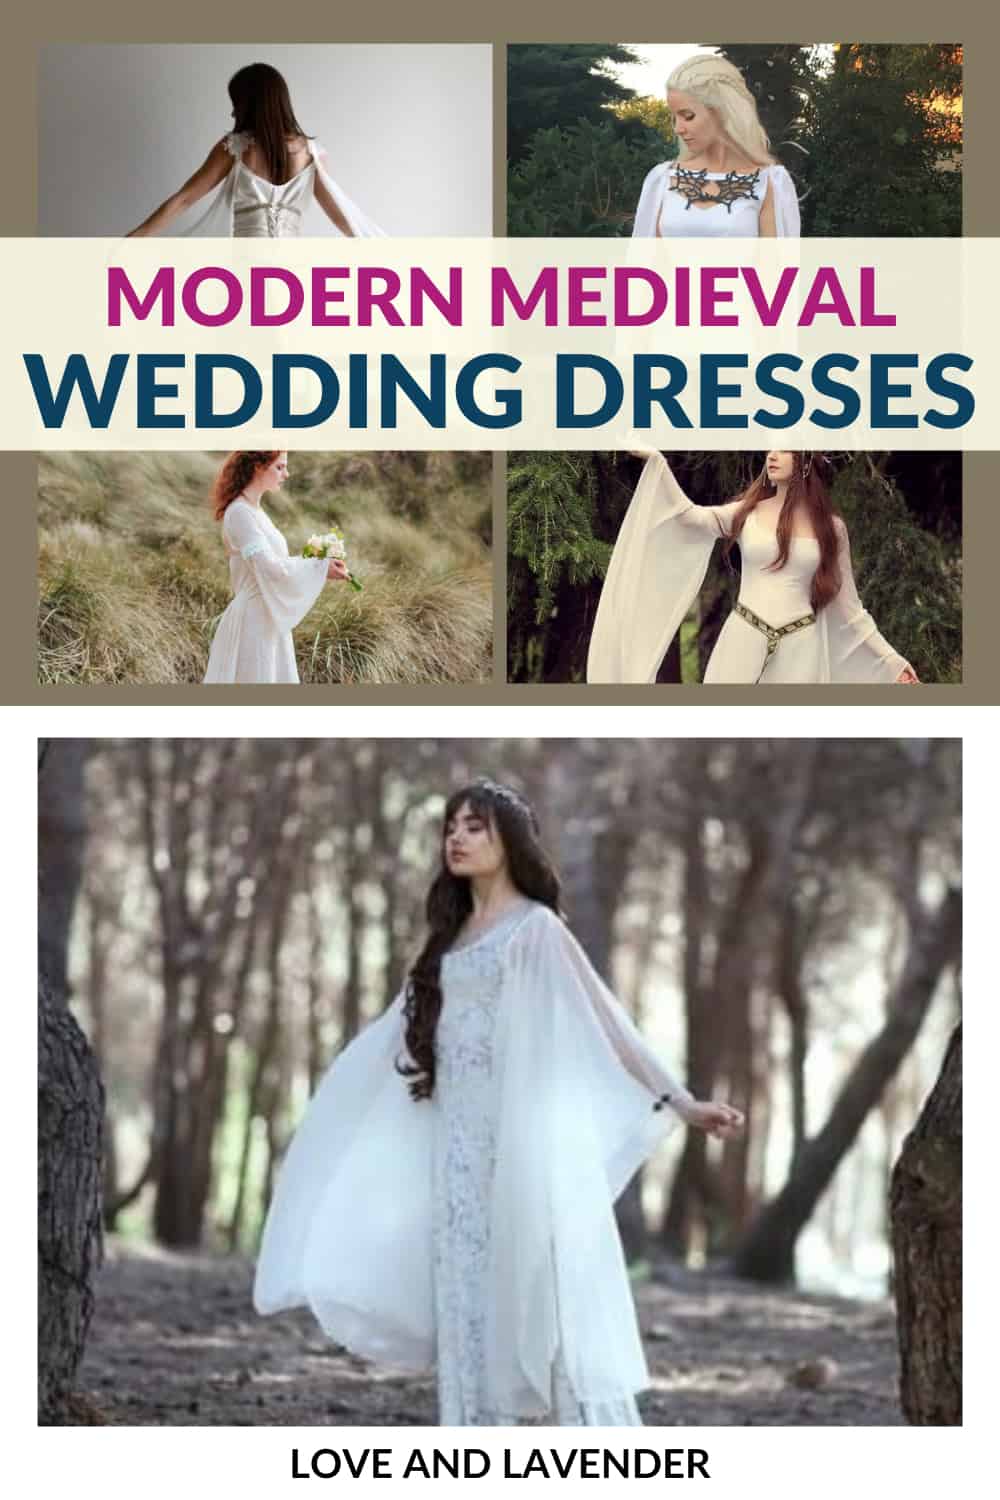 Medieval Wedding Dresses in a Modern Style - Pinterest pin 